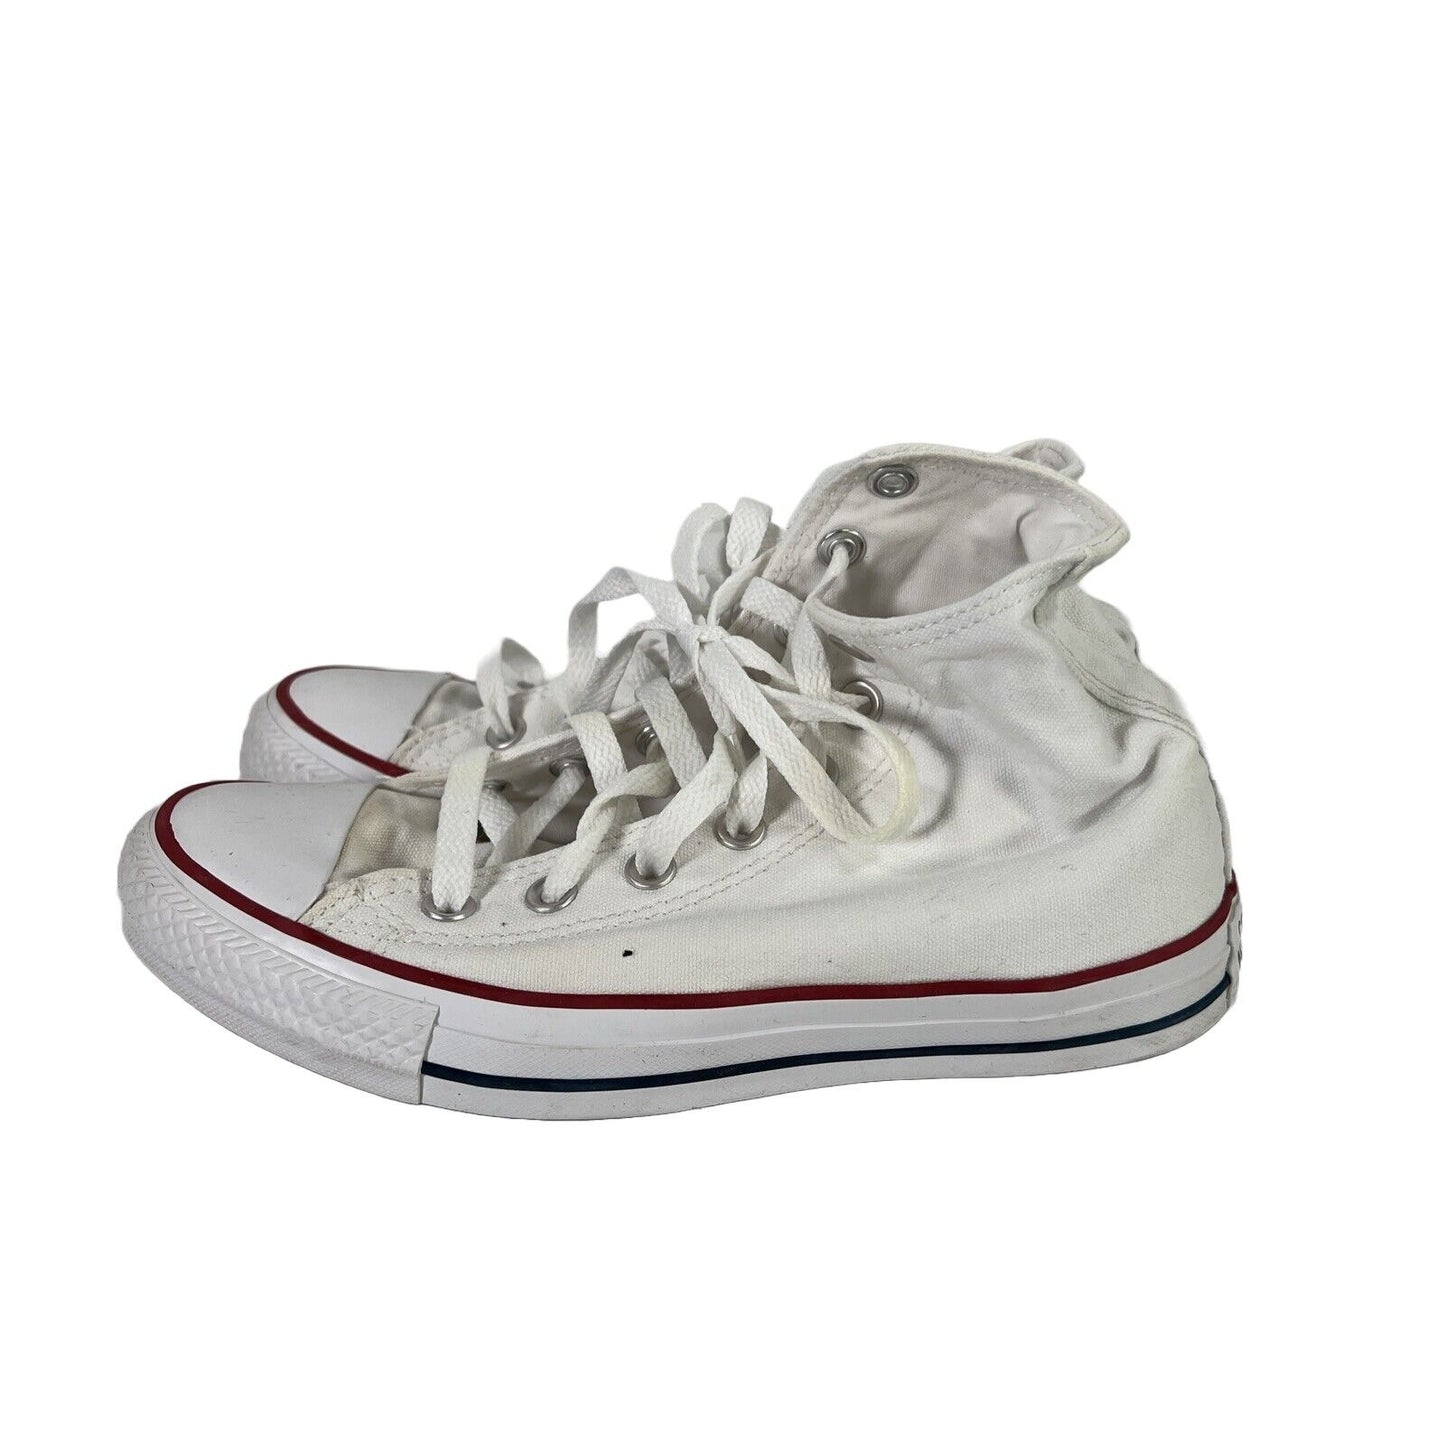 Converse Unisex White Canvas Lace Up High Top Sneakers - Women's 7